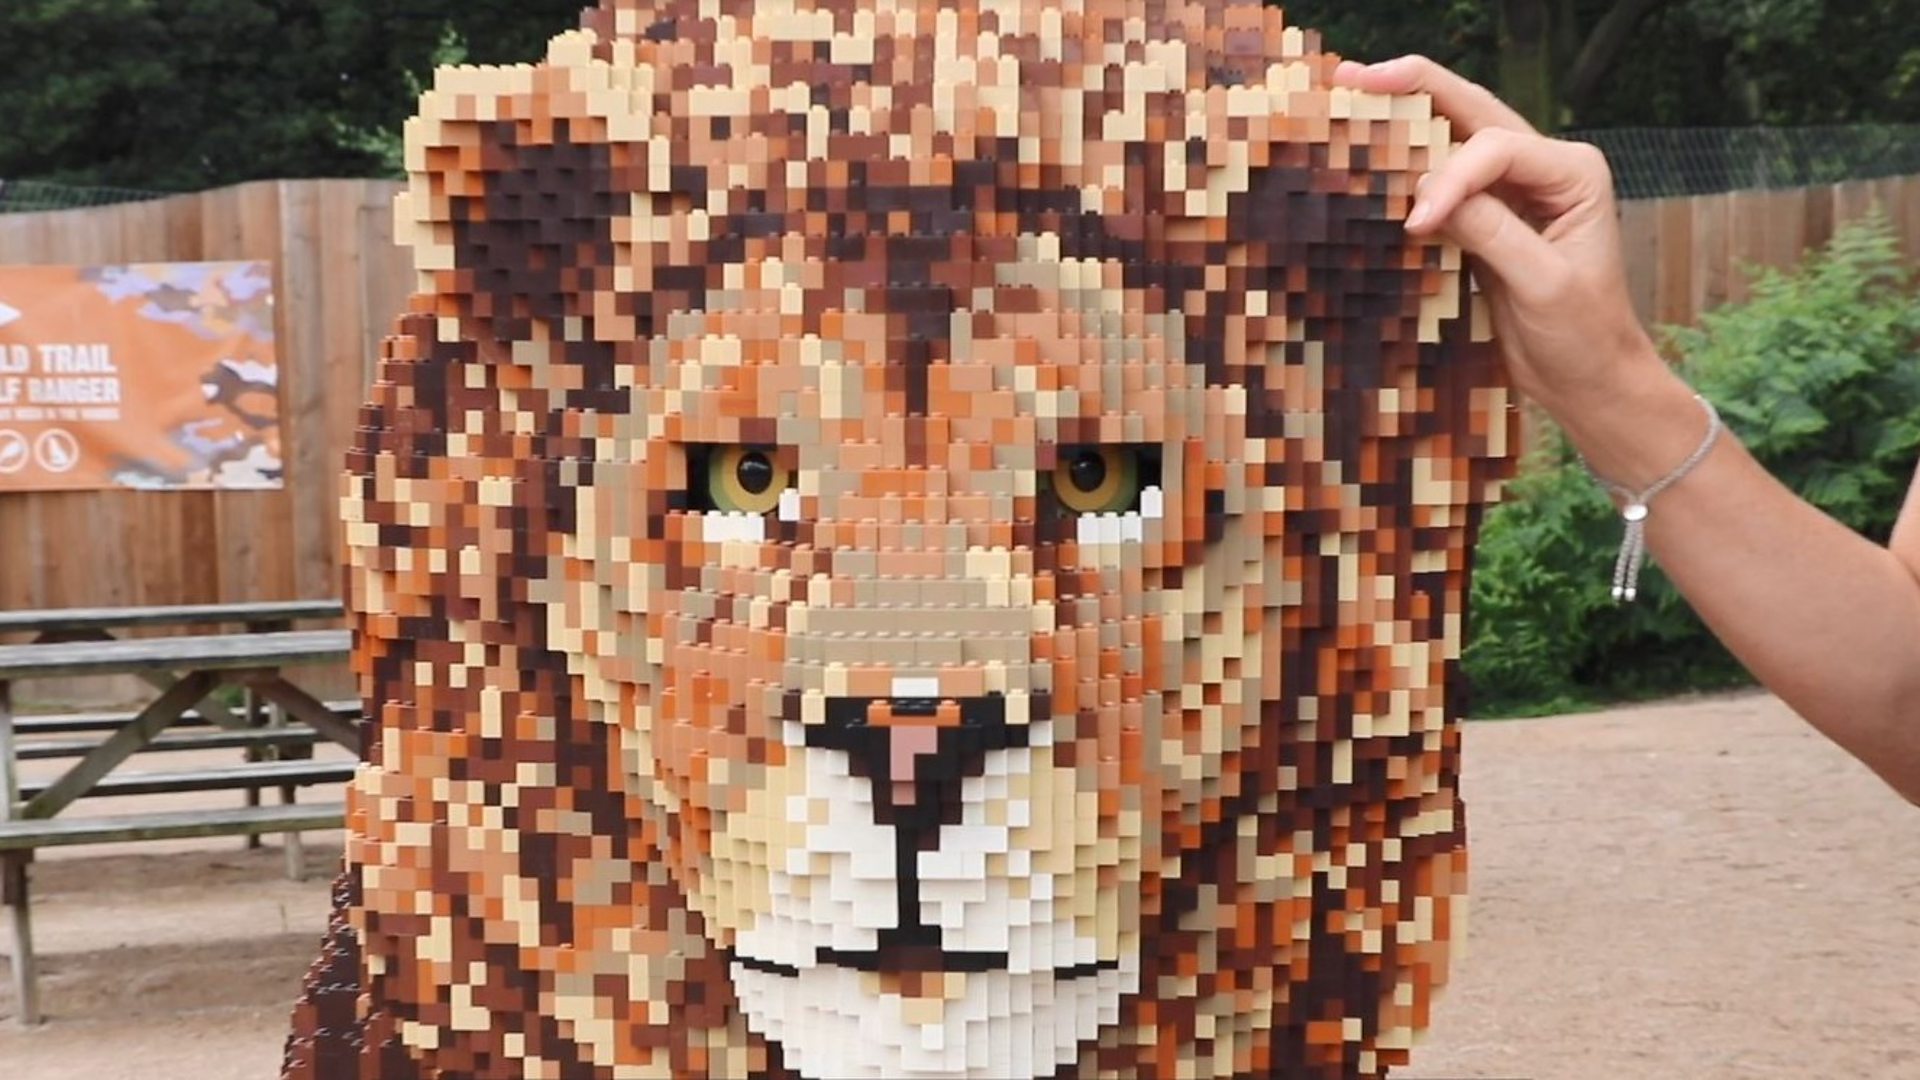 Lego life-size 'animals' on show at Knowsley Safari - BBC News